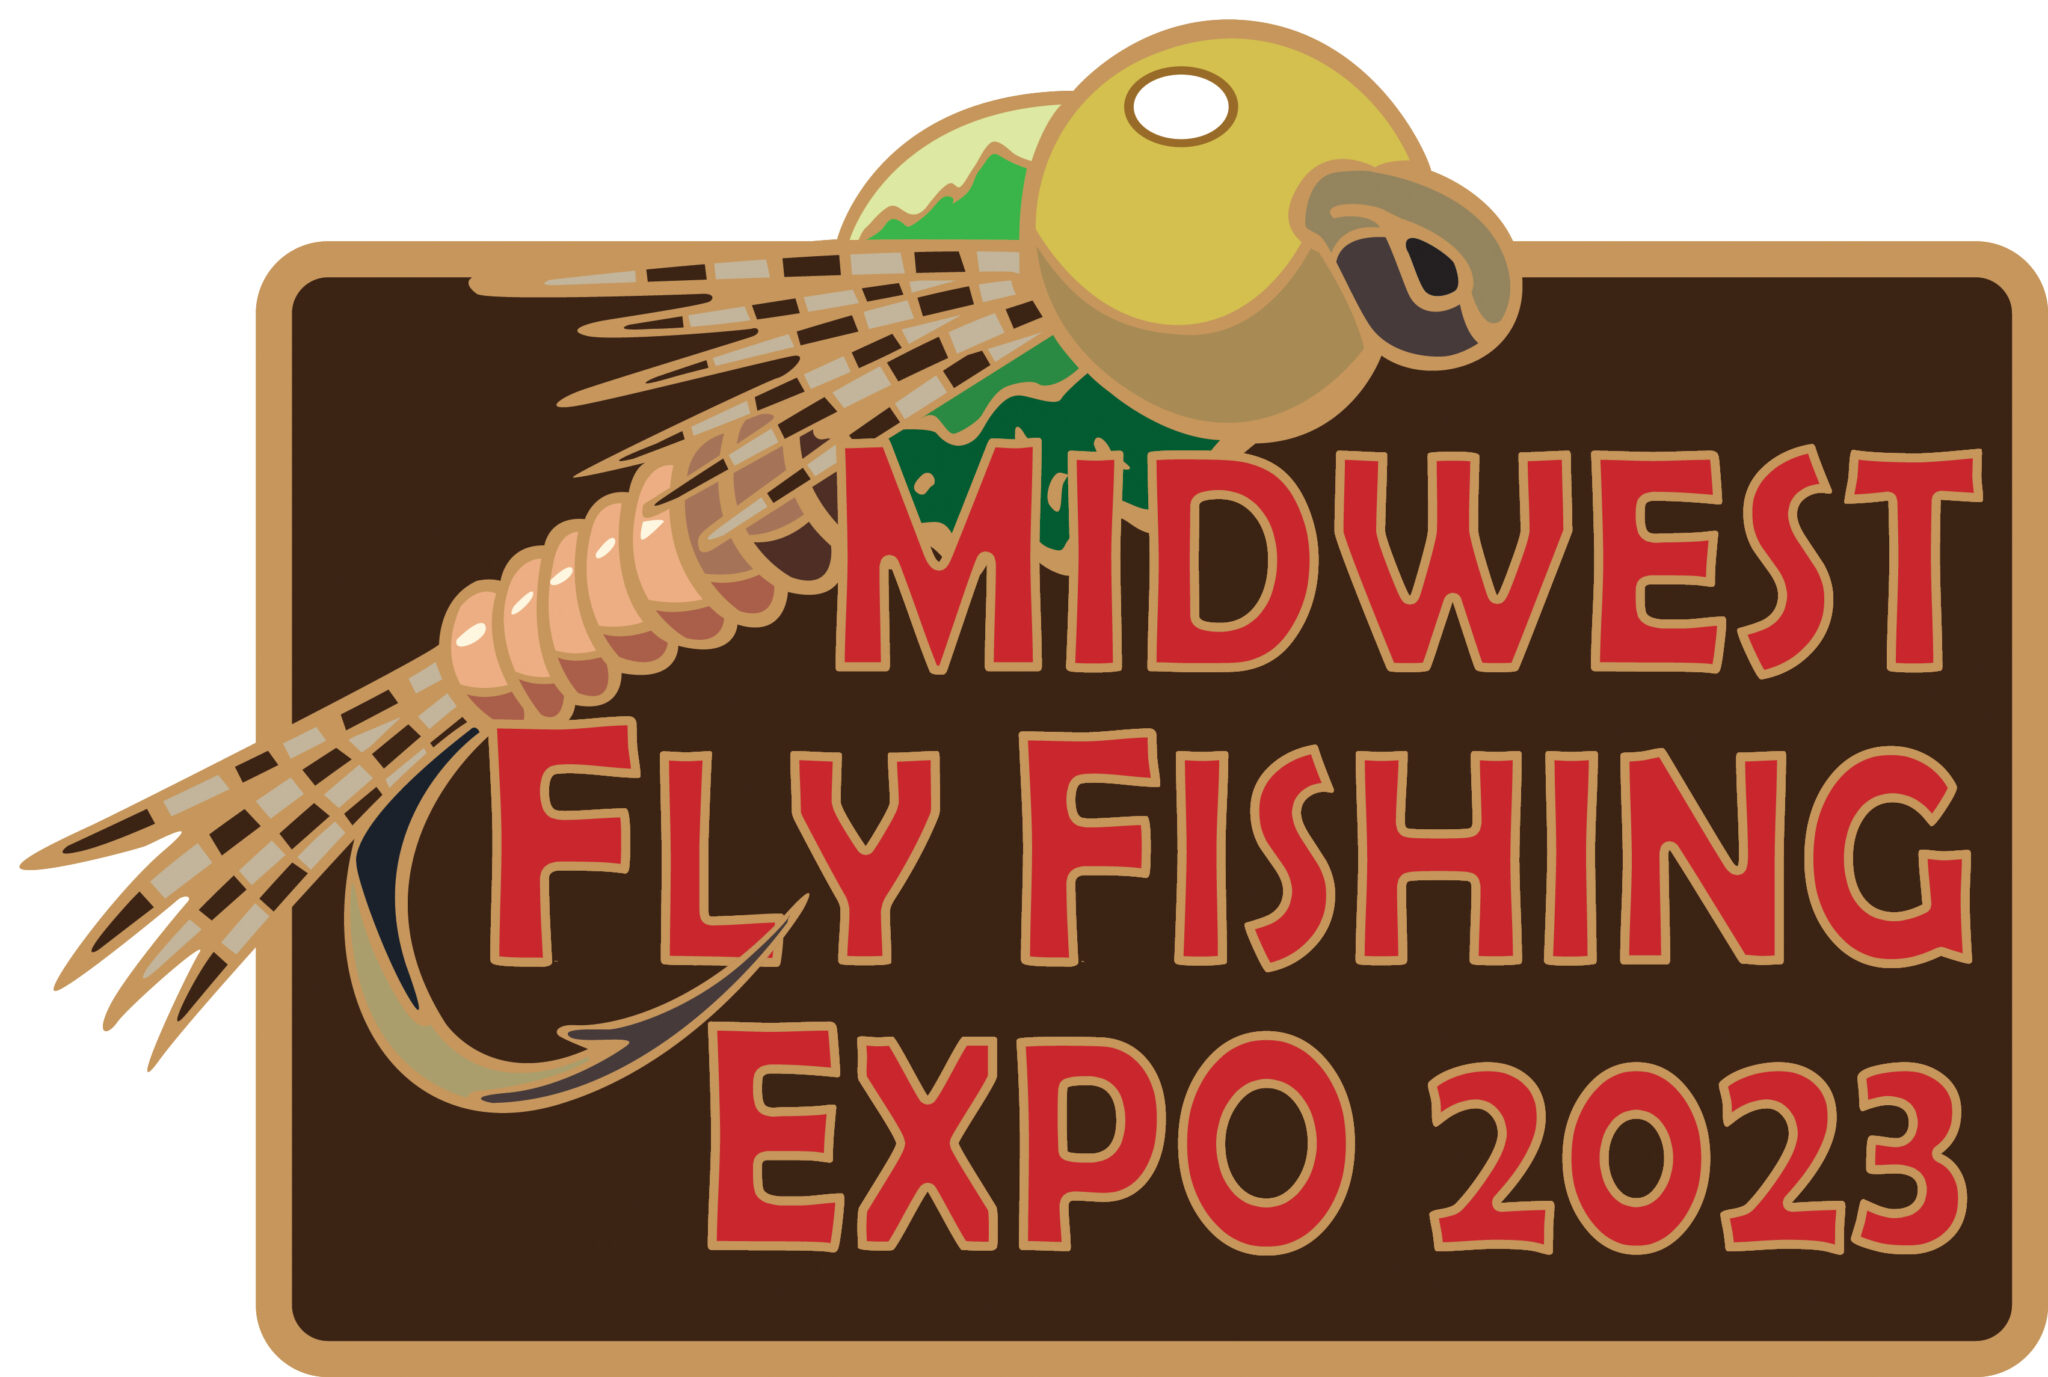 Fishing Exhibition in Warren, MI Midwest Fly Fishing Expo